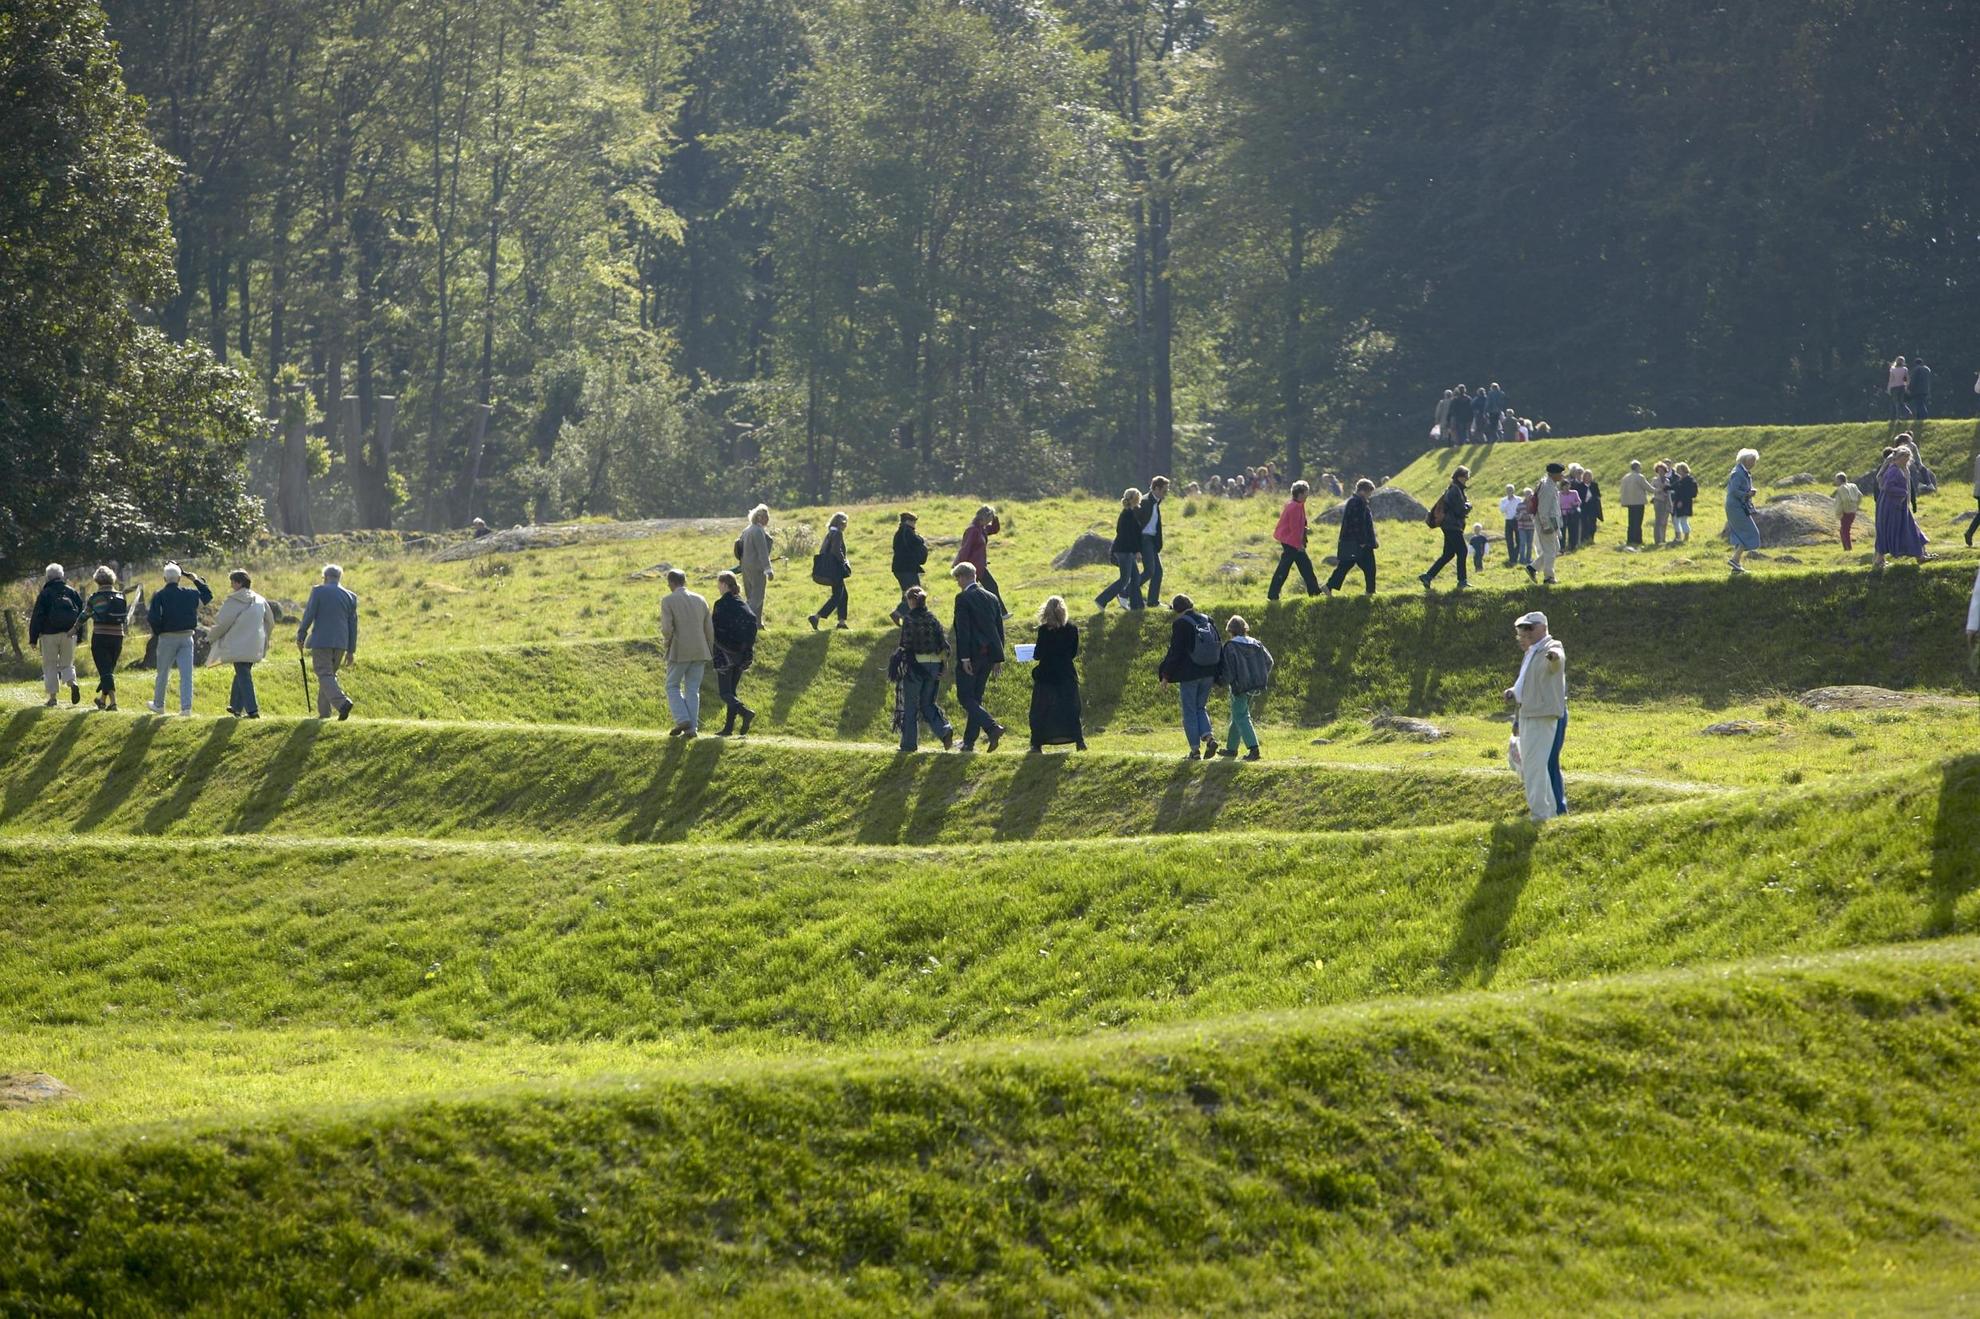 A art work called “Eleven Minute Line” in a sculpture park. Several people are walking on the art work, a 500 meter winding ridge of earth, stone and grass.